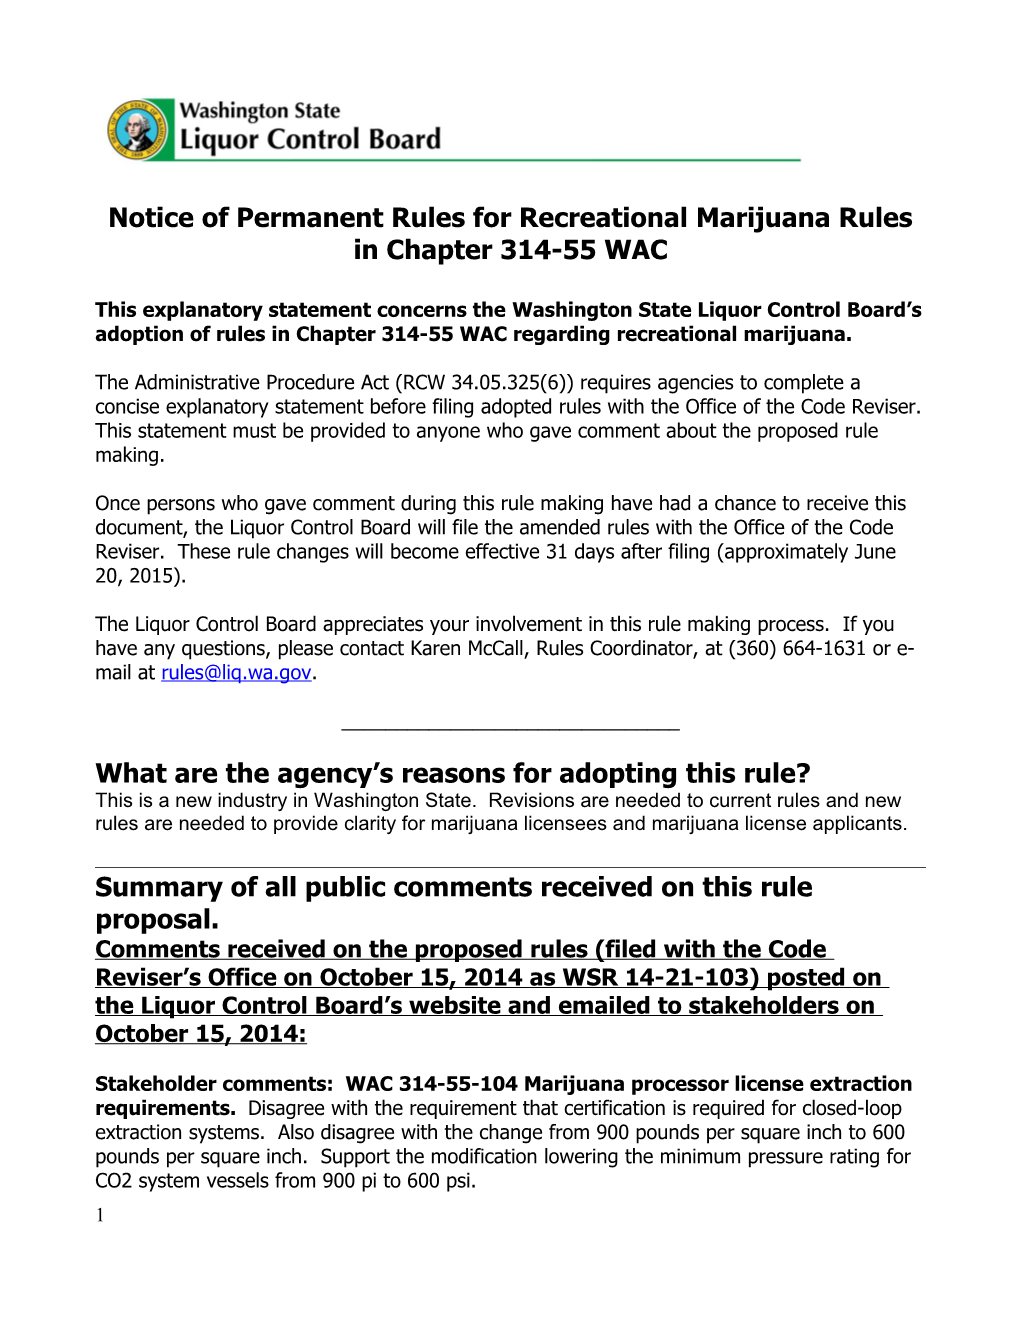 Notice of Permanent Rulesfor Recreational Marijuana Rules in Chapter 314-55 WAC